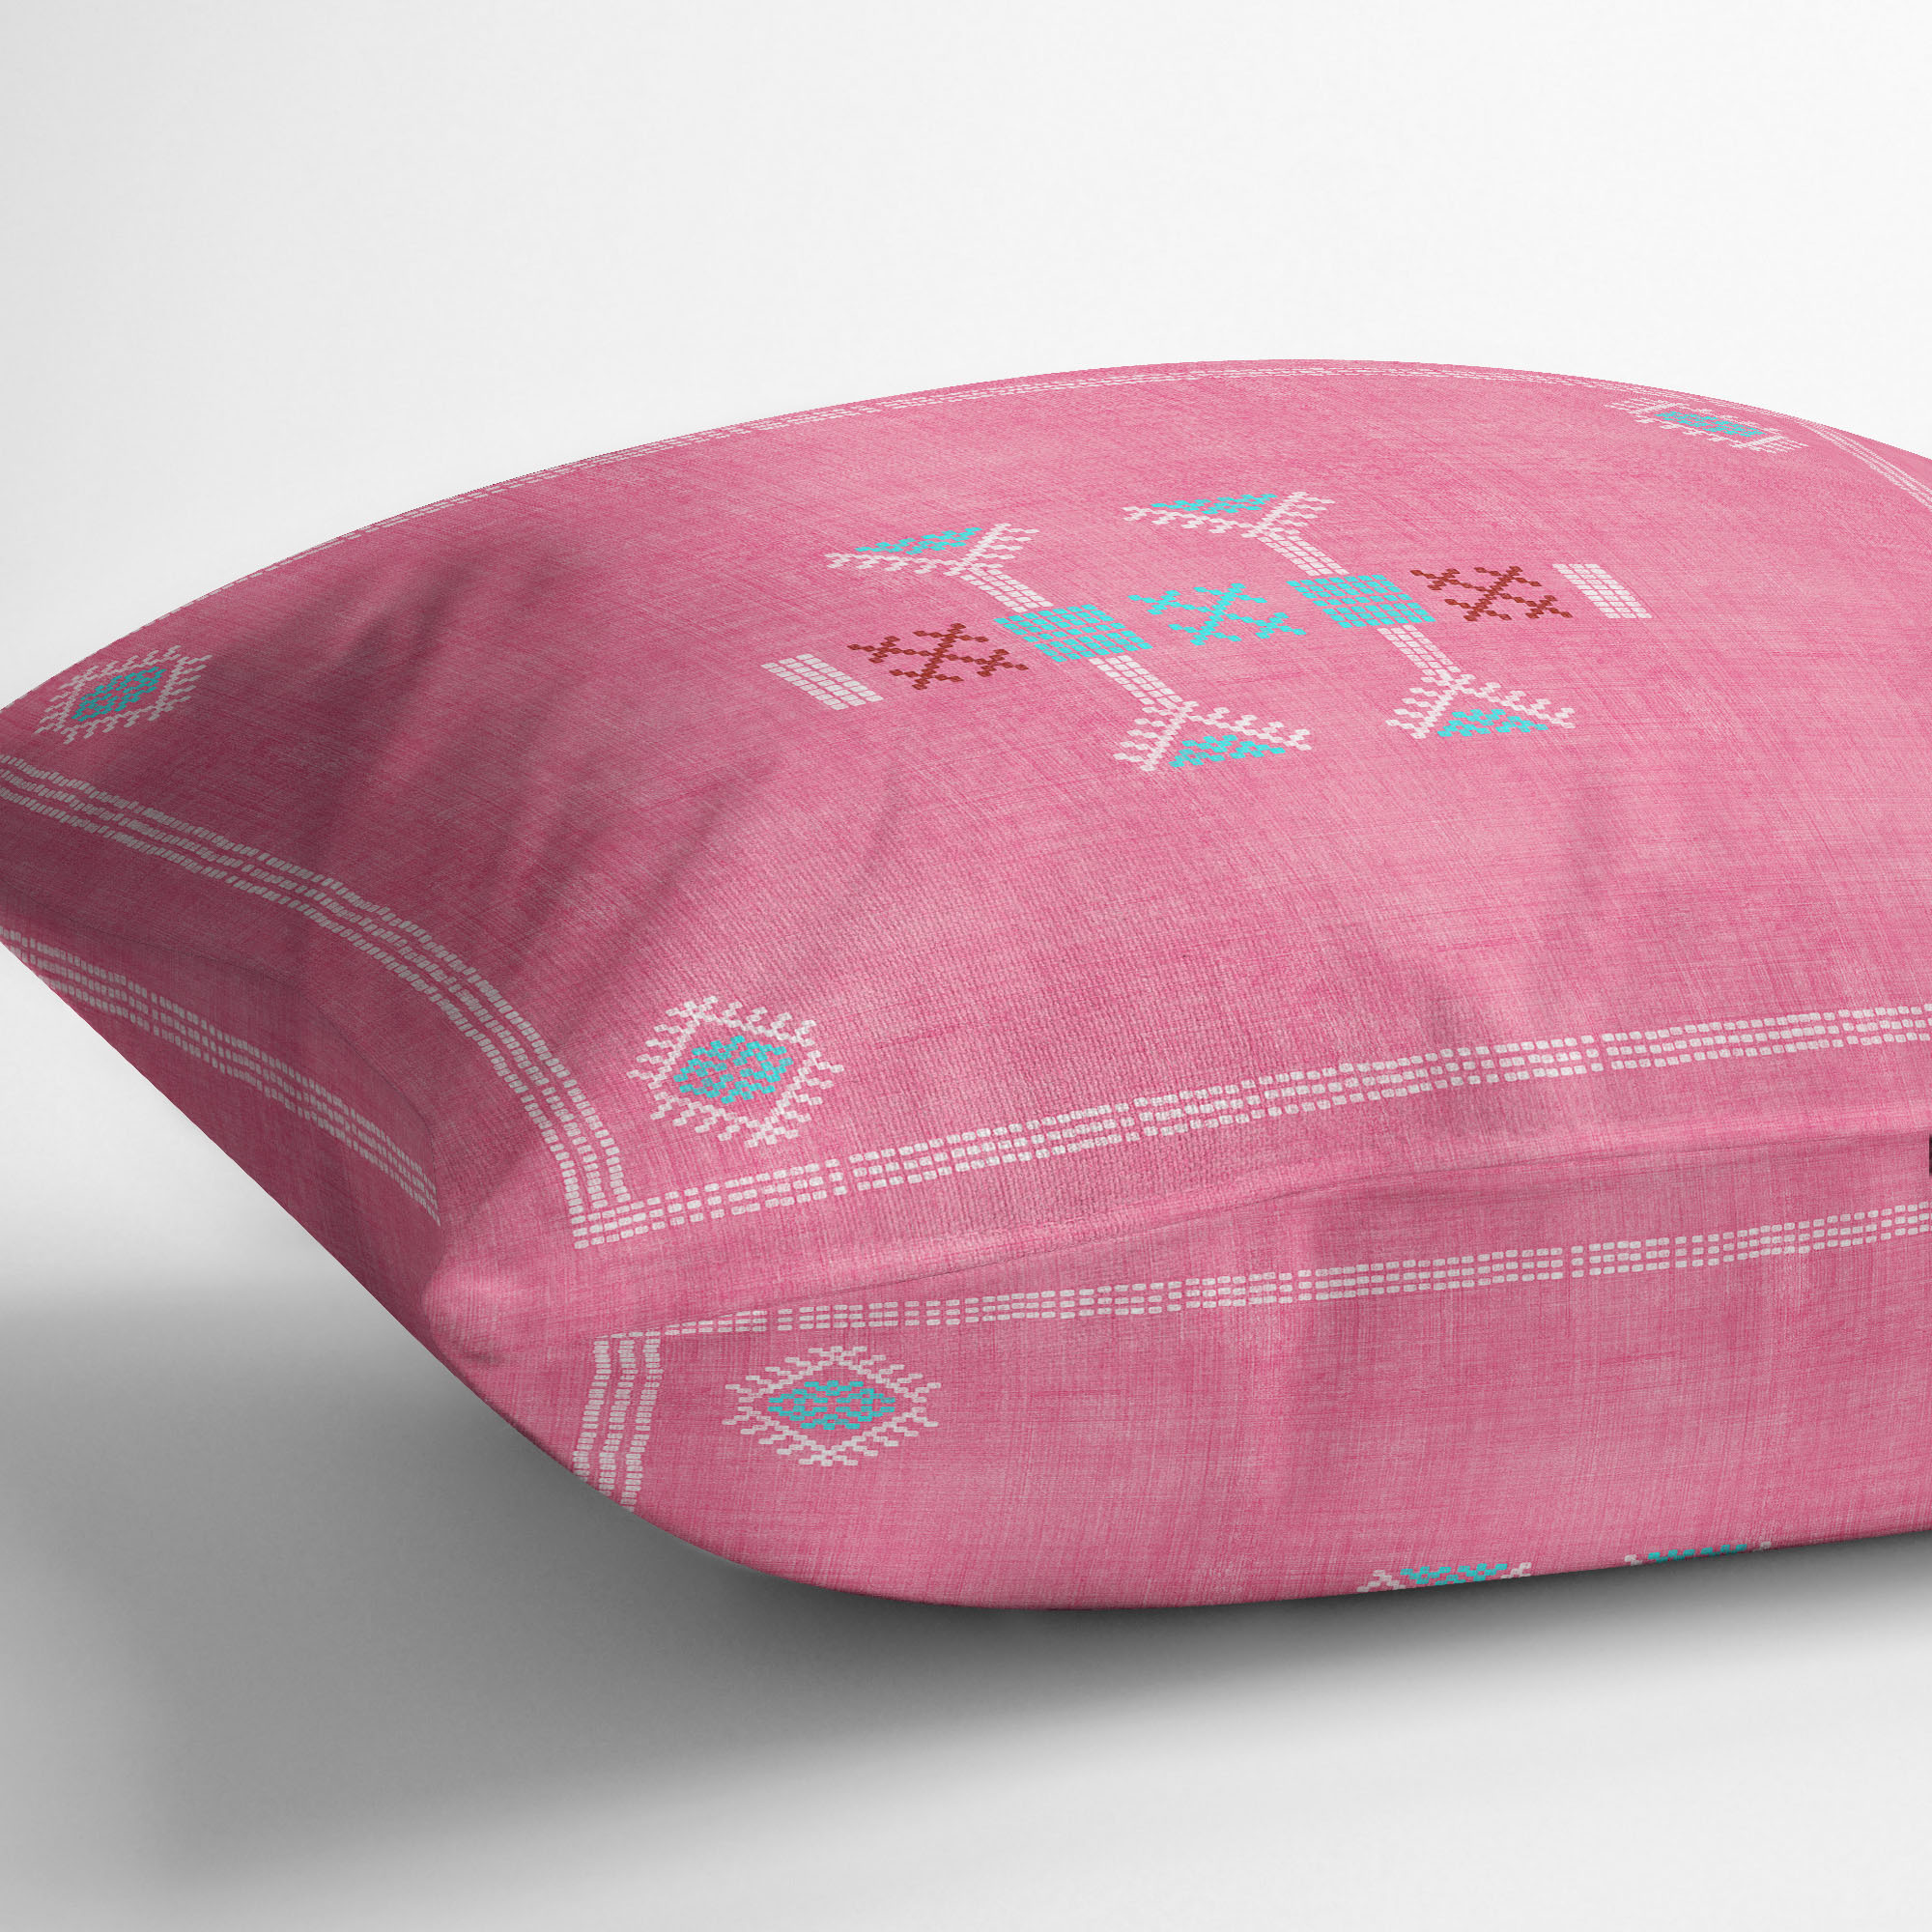 Moroccan Kilim Pink Outdoor Pillow by Kavka Designs - image 4 of 5